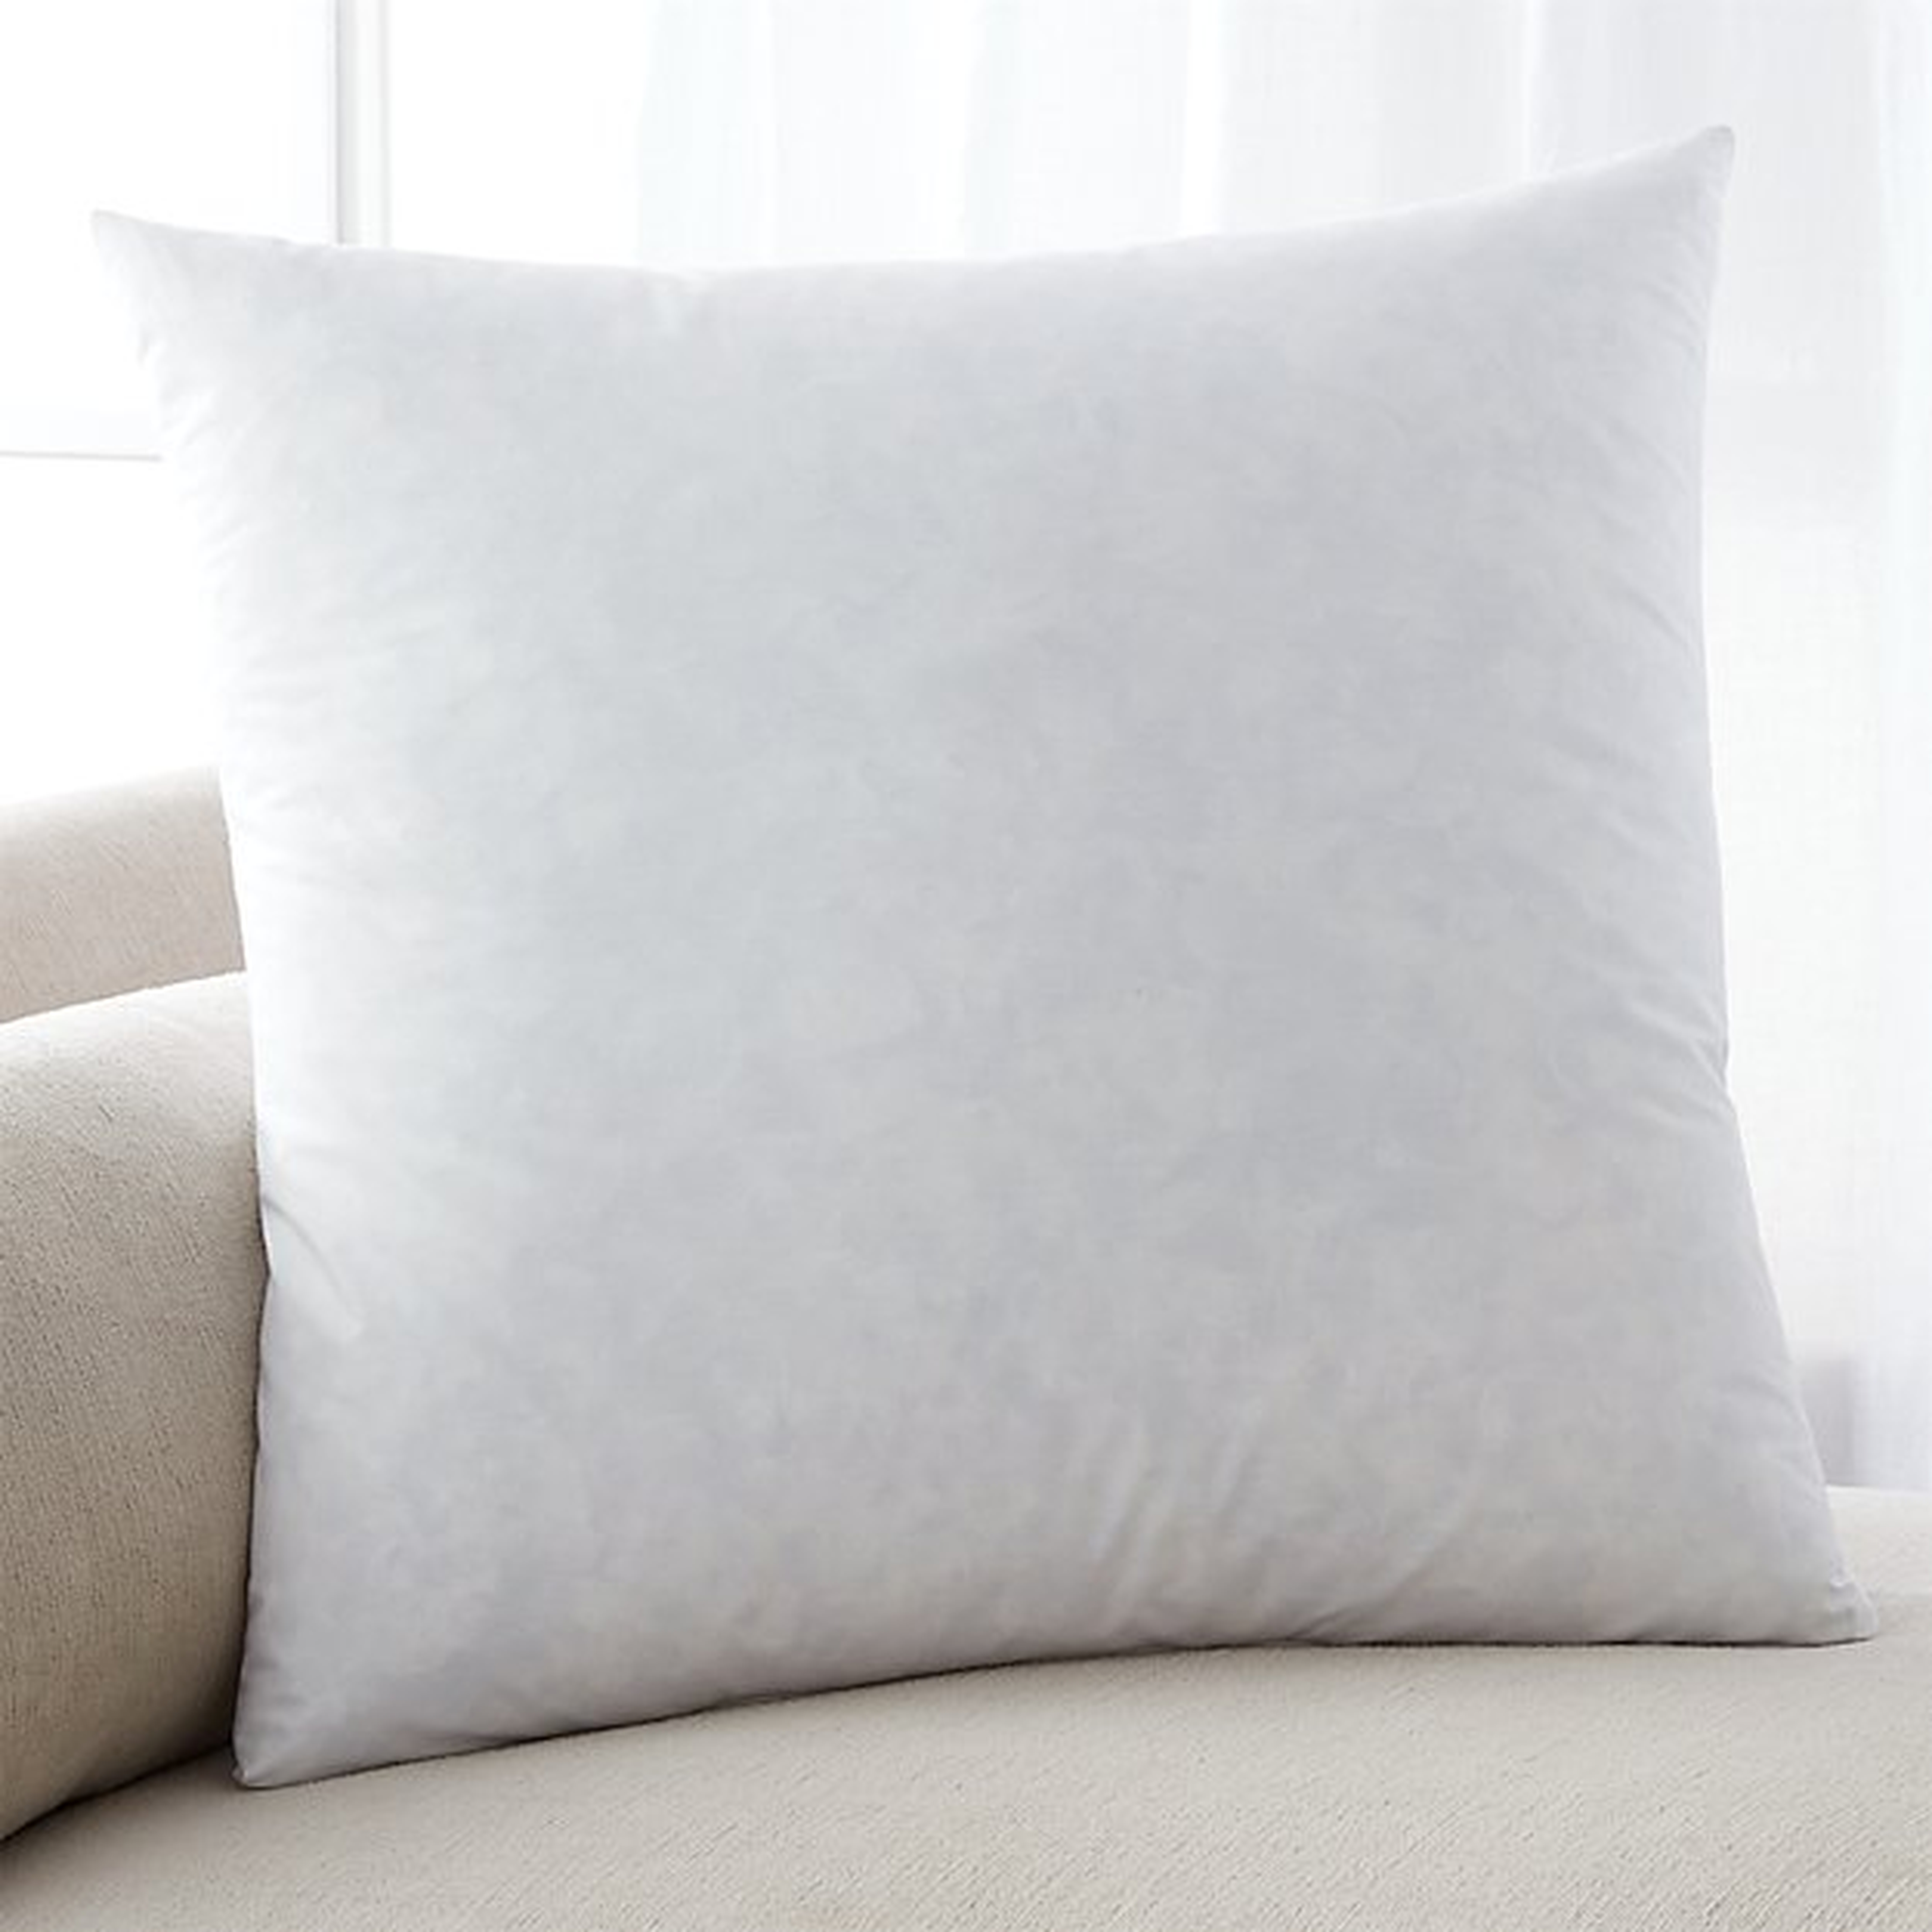 Feather-Down 23" Pillow Insert - Crate and Barrel